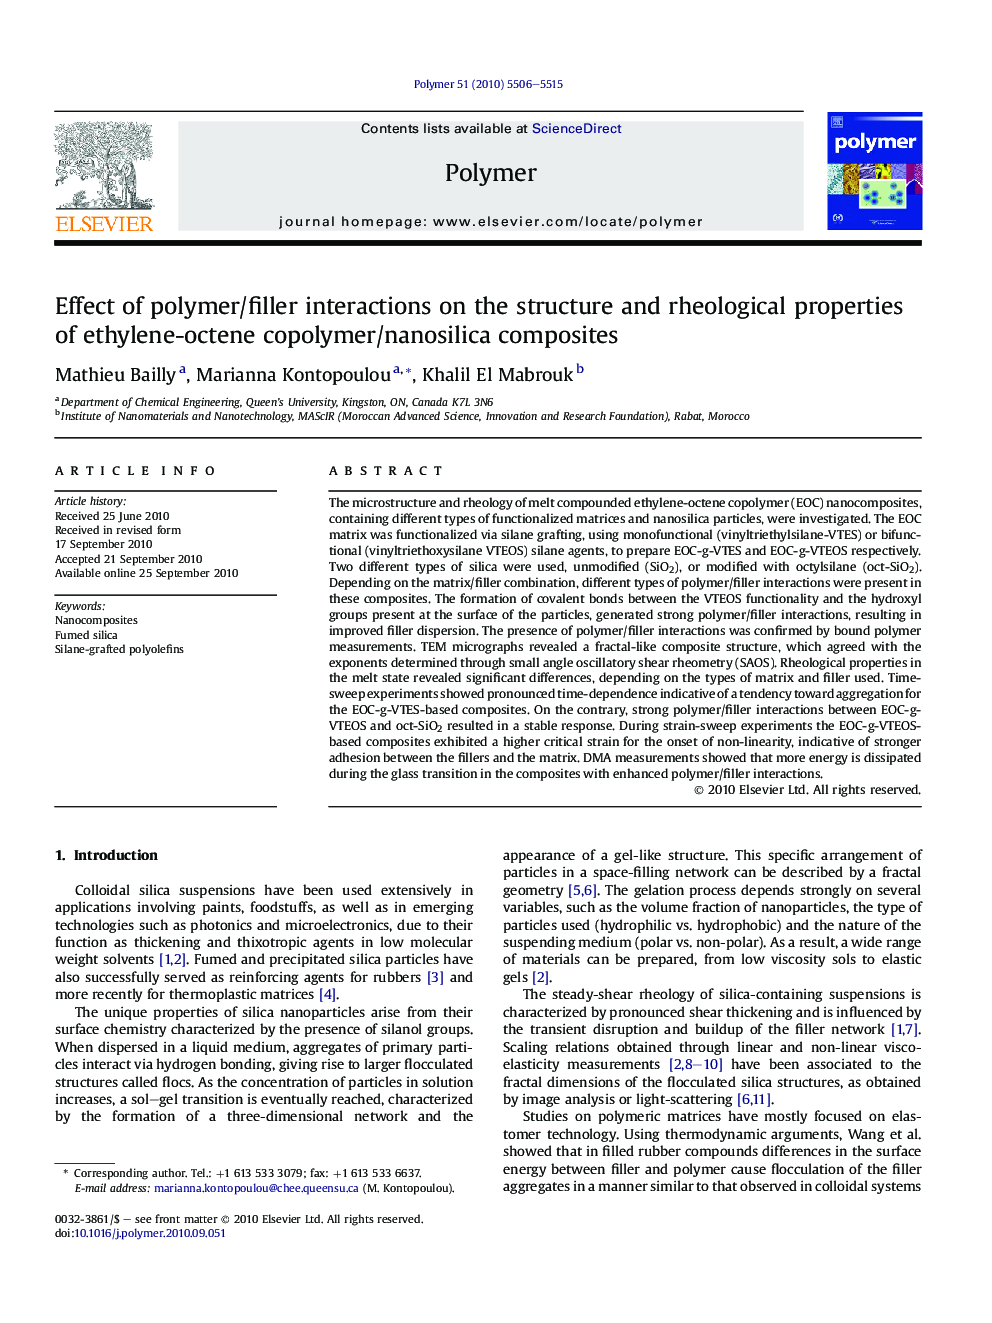 Effect of polymer/filler interactions on the structure and rheological properties ofÂ ethylene-octene copolymer/nanosilica composites